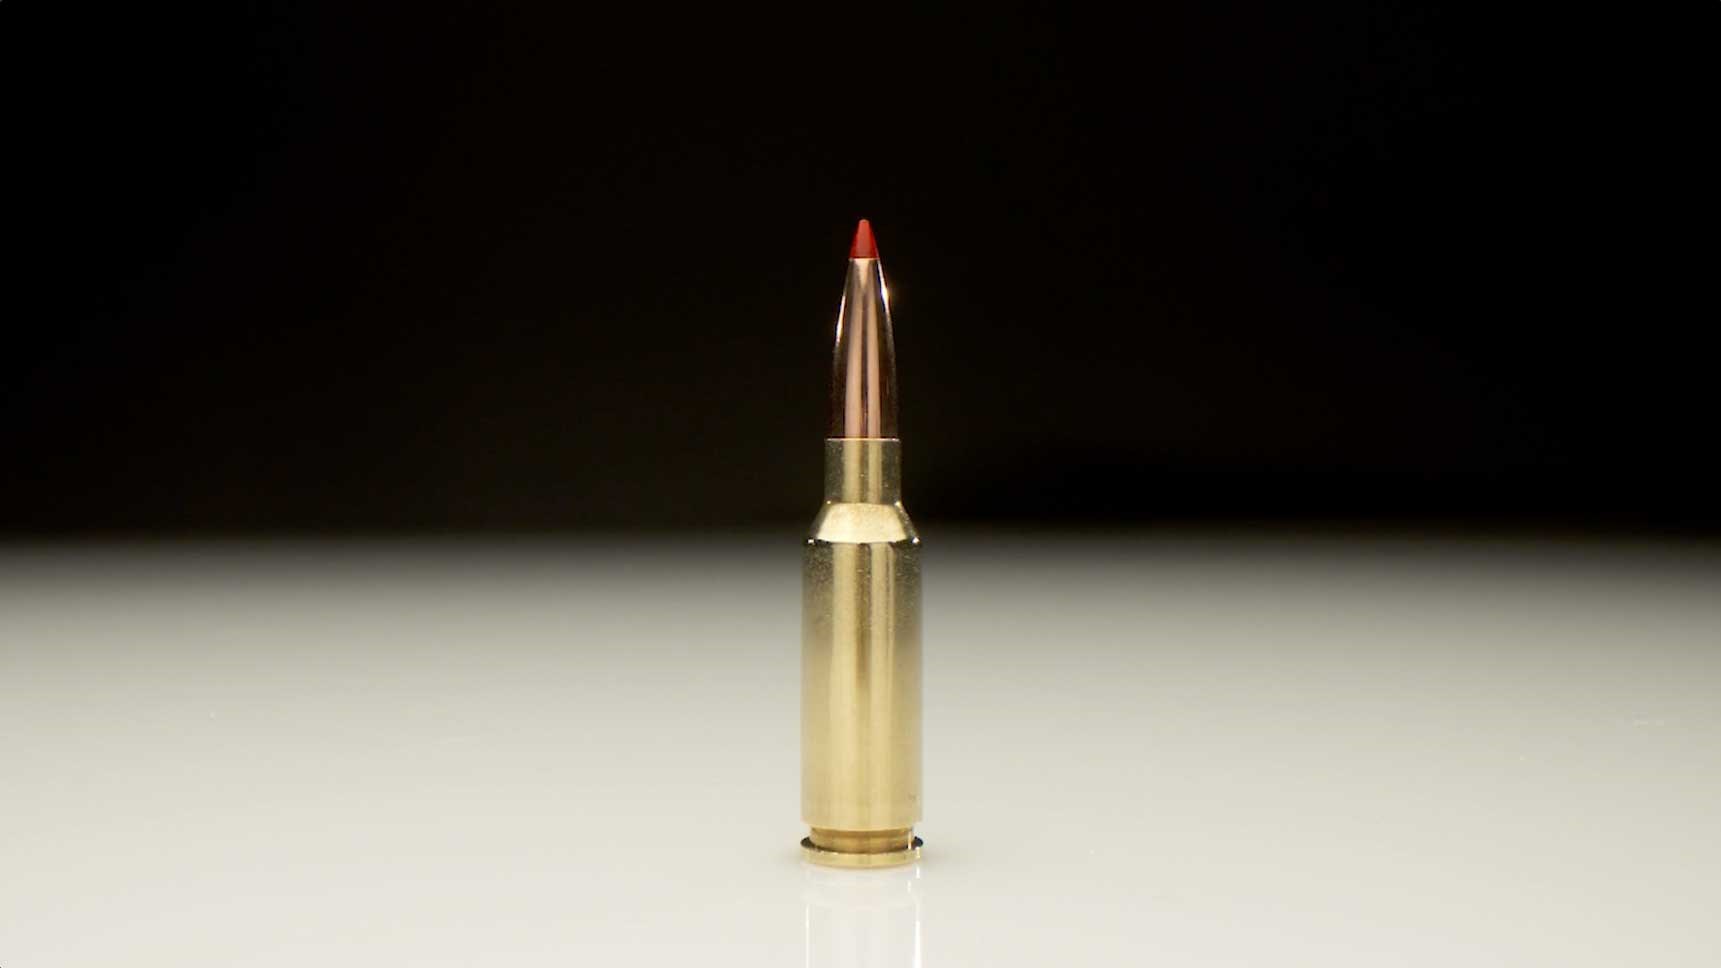 Hornady 6mm ARC cartridge shown on a white table with a black background.